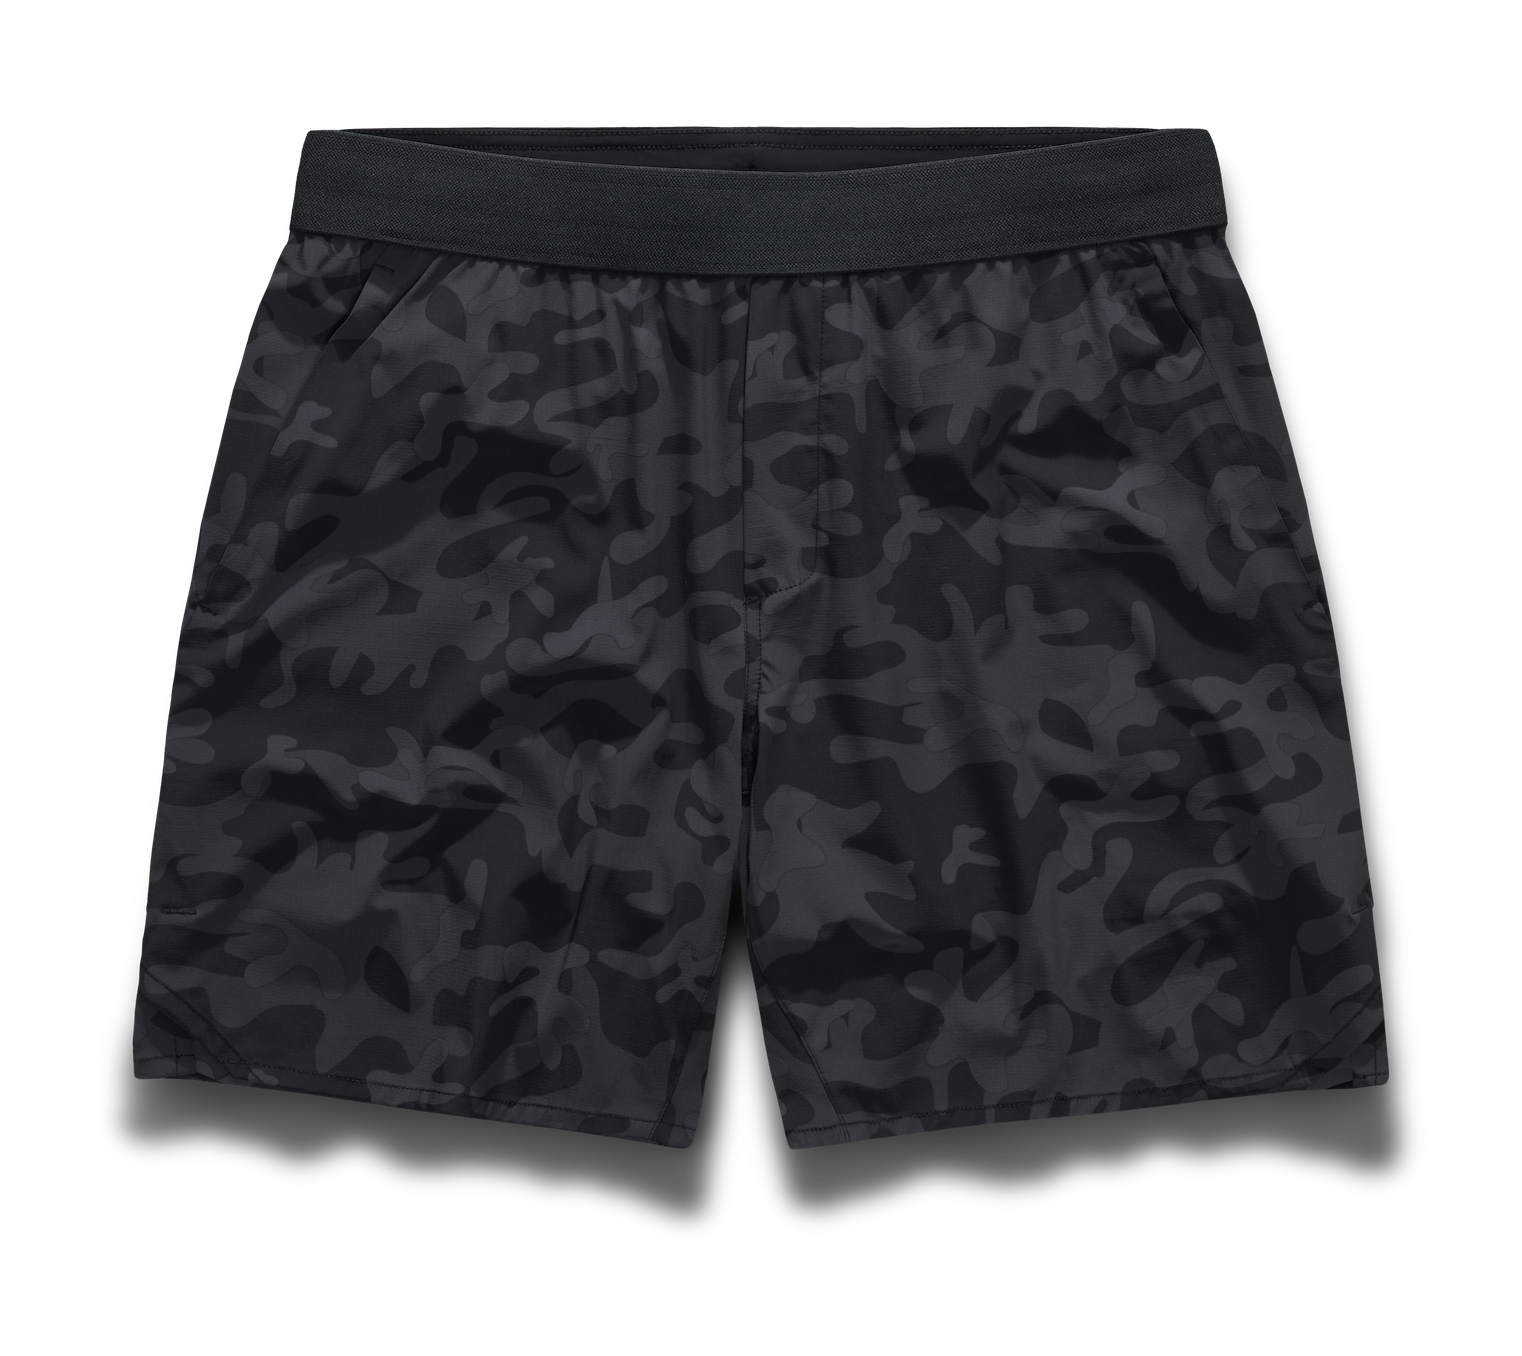 Tactical Short 3 Pack - Black Camo/7-inch